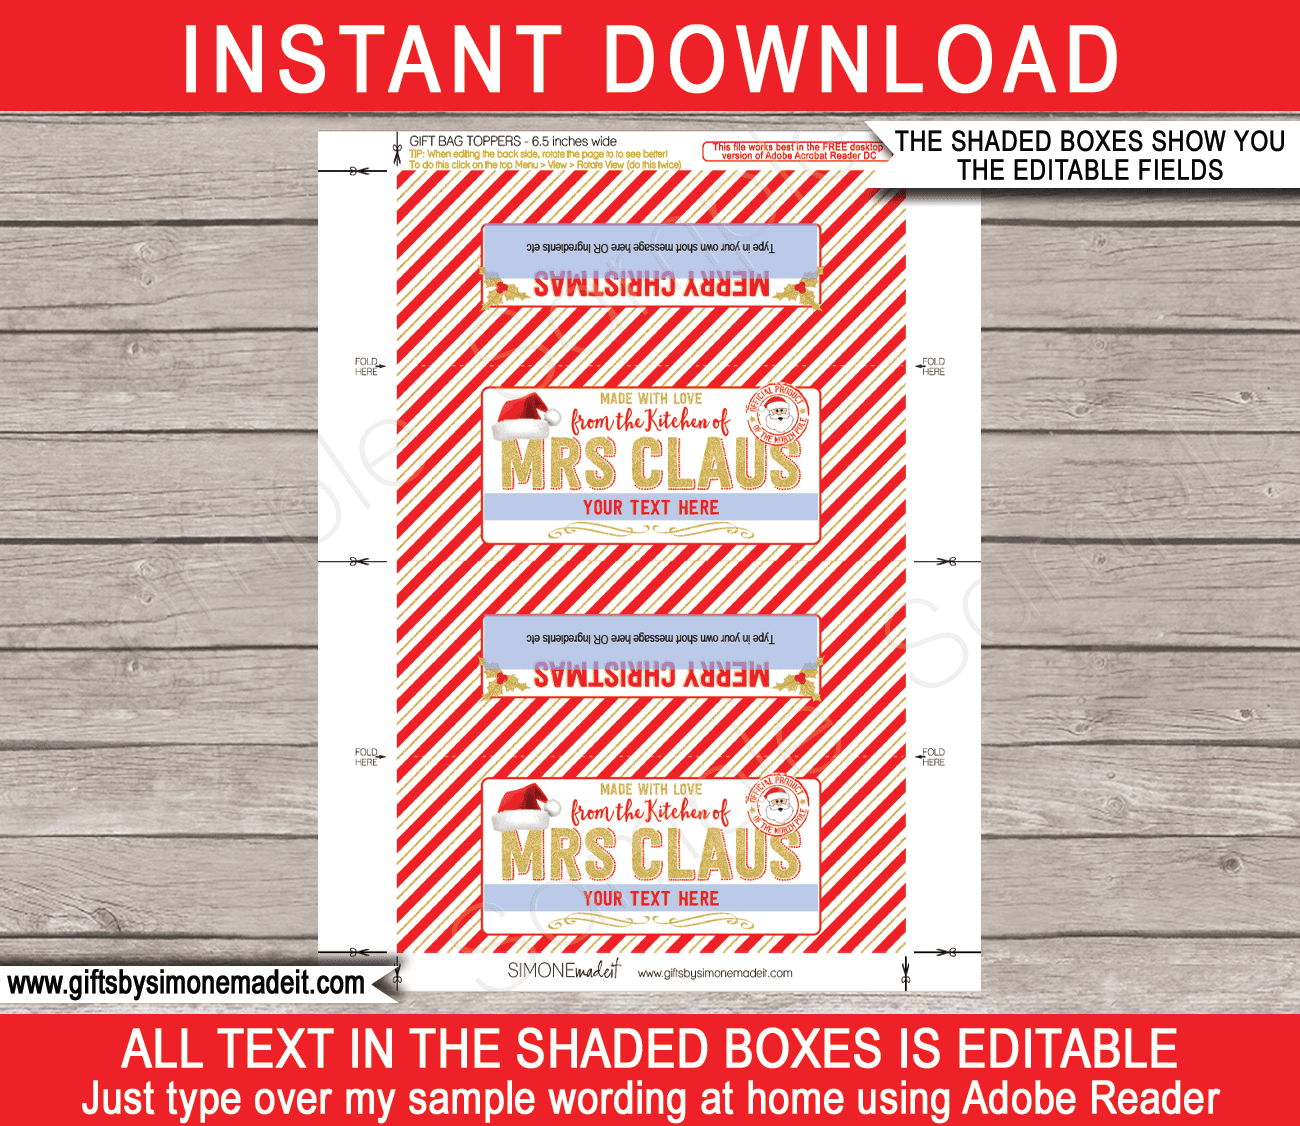 https://www.giftsbysimonemadeit.com/wp-content/uploads/2022/11/From-the-kitchen-of-Mrs-Claus-Gift-Tags-Template-editable-text.png